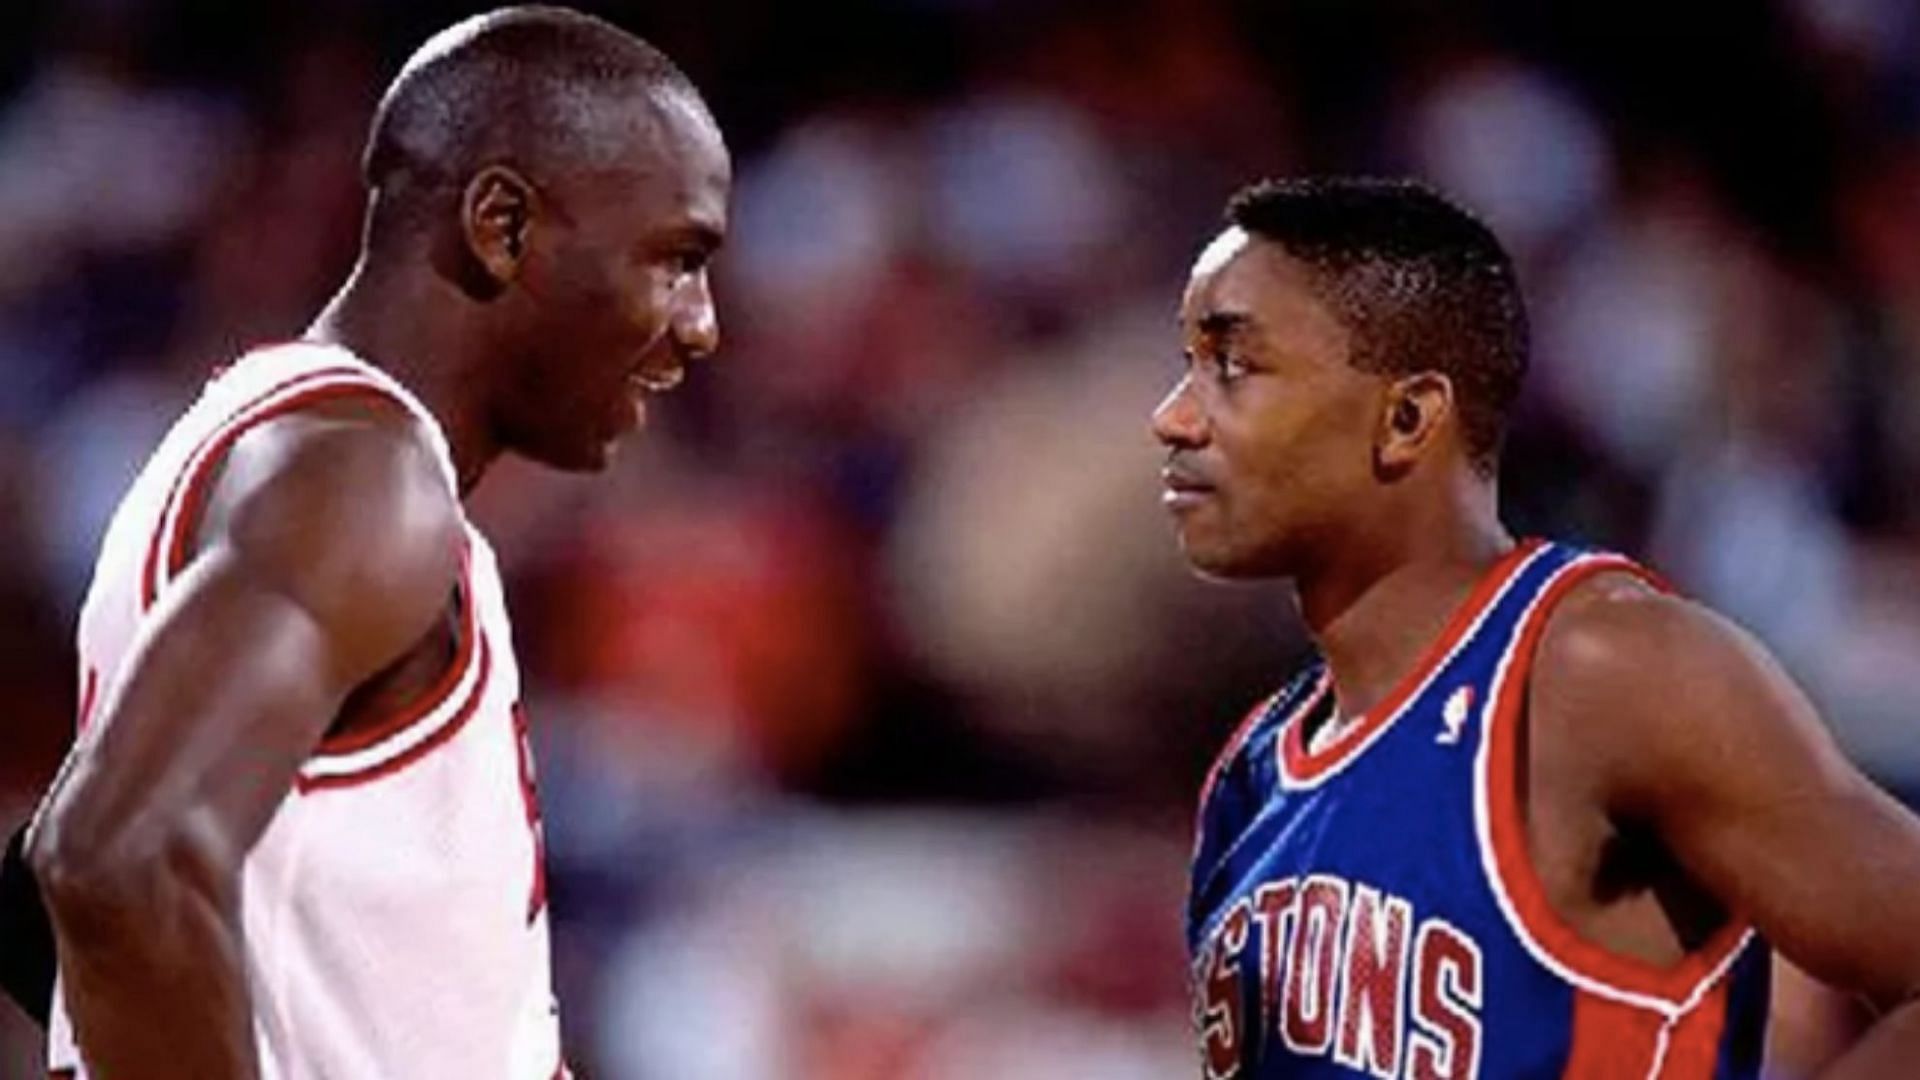 Michael Jordan and Isiah Thomas continue to be bitter rivals.